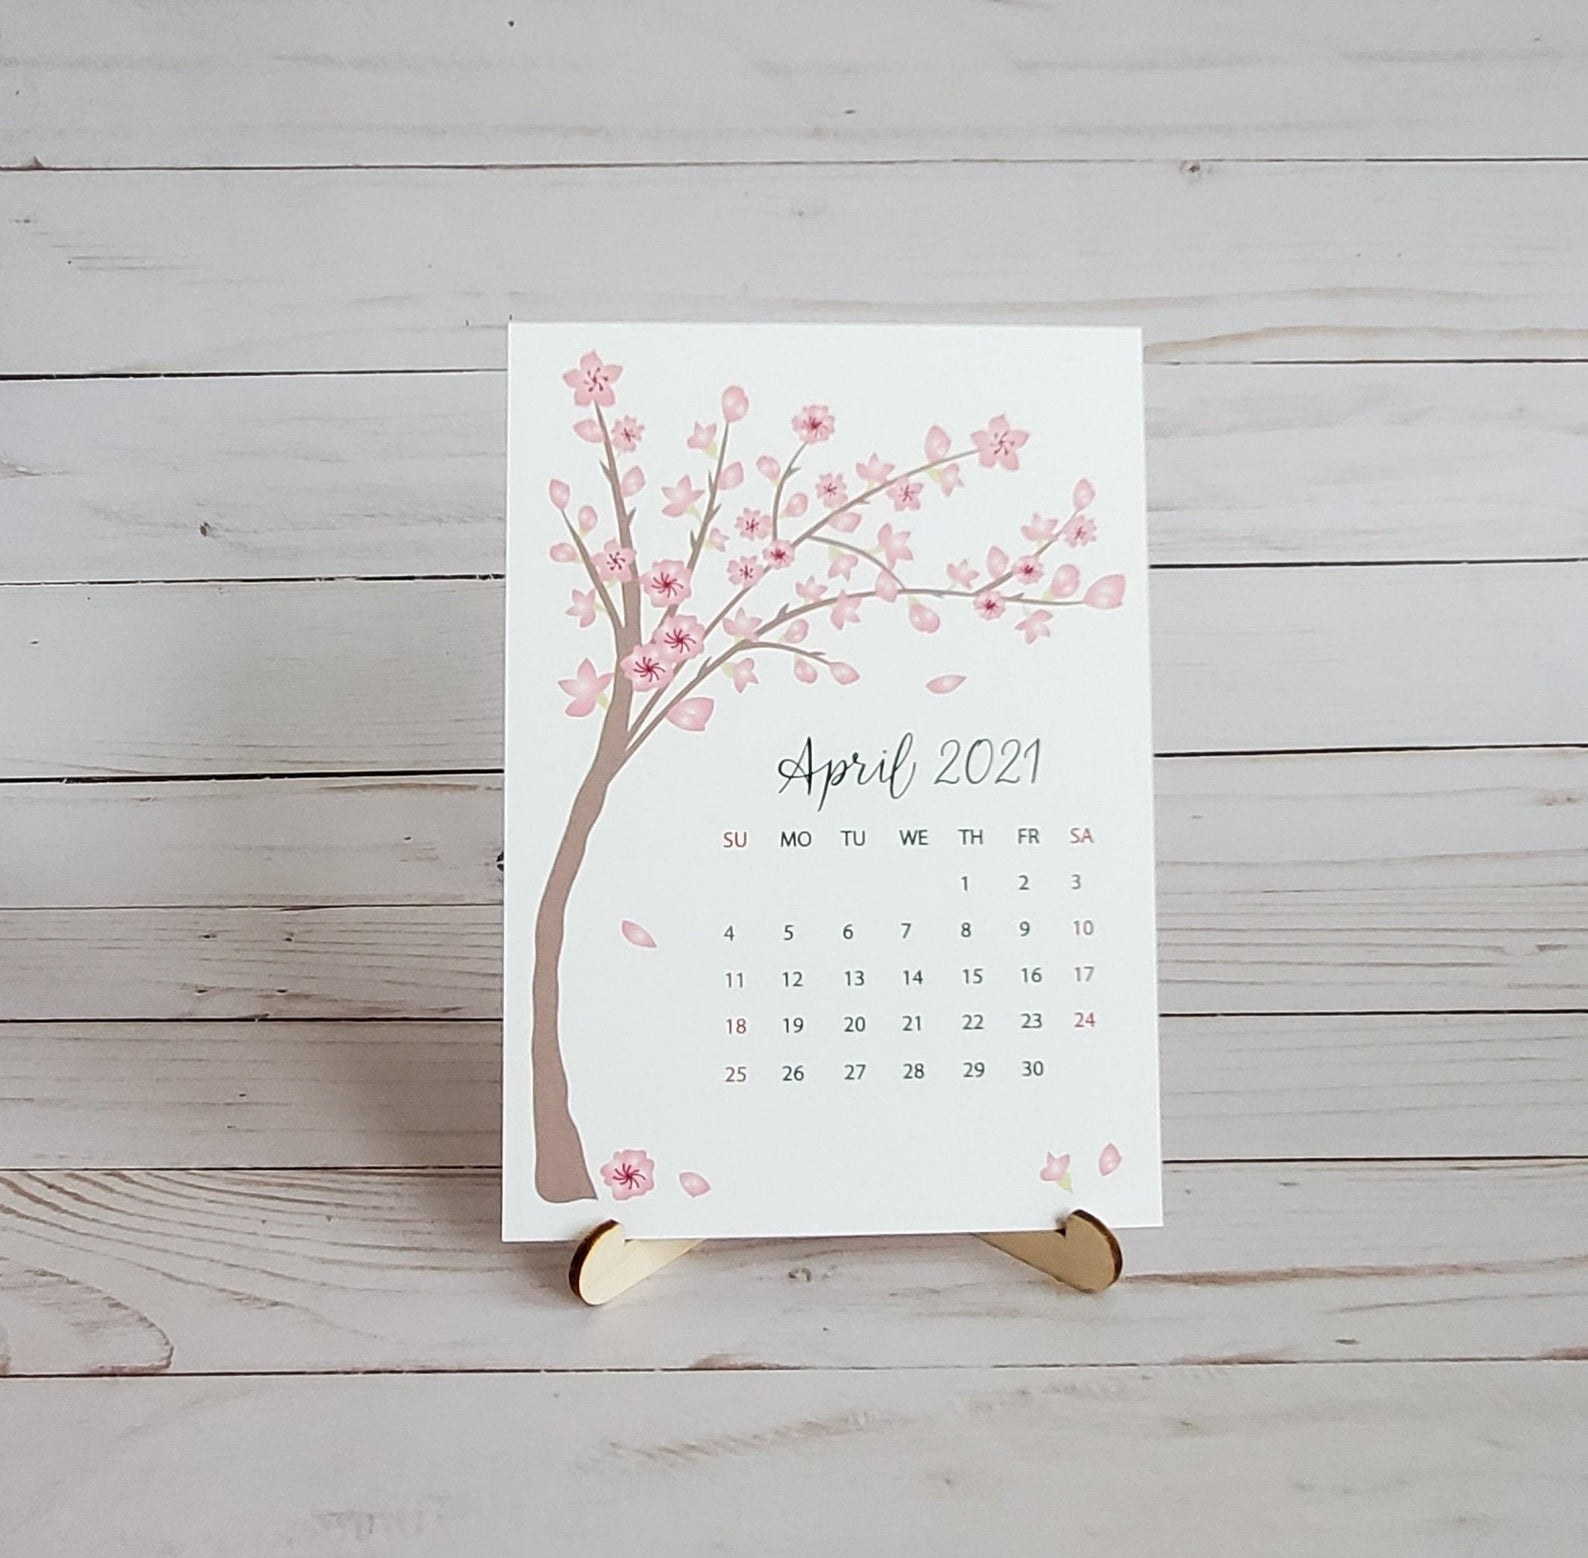 Mini desk calendar placed on stand with April 2021 page in the front